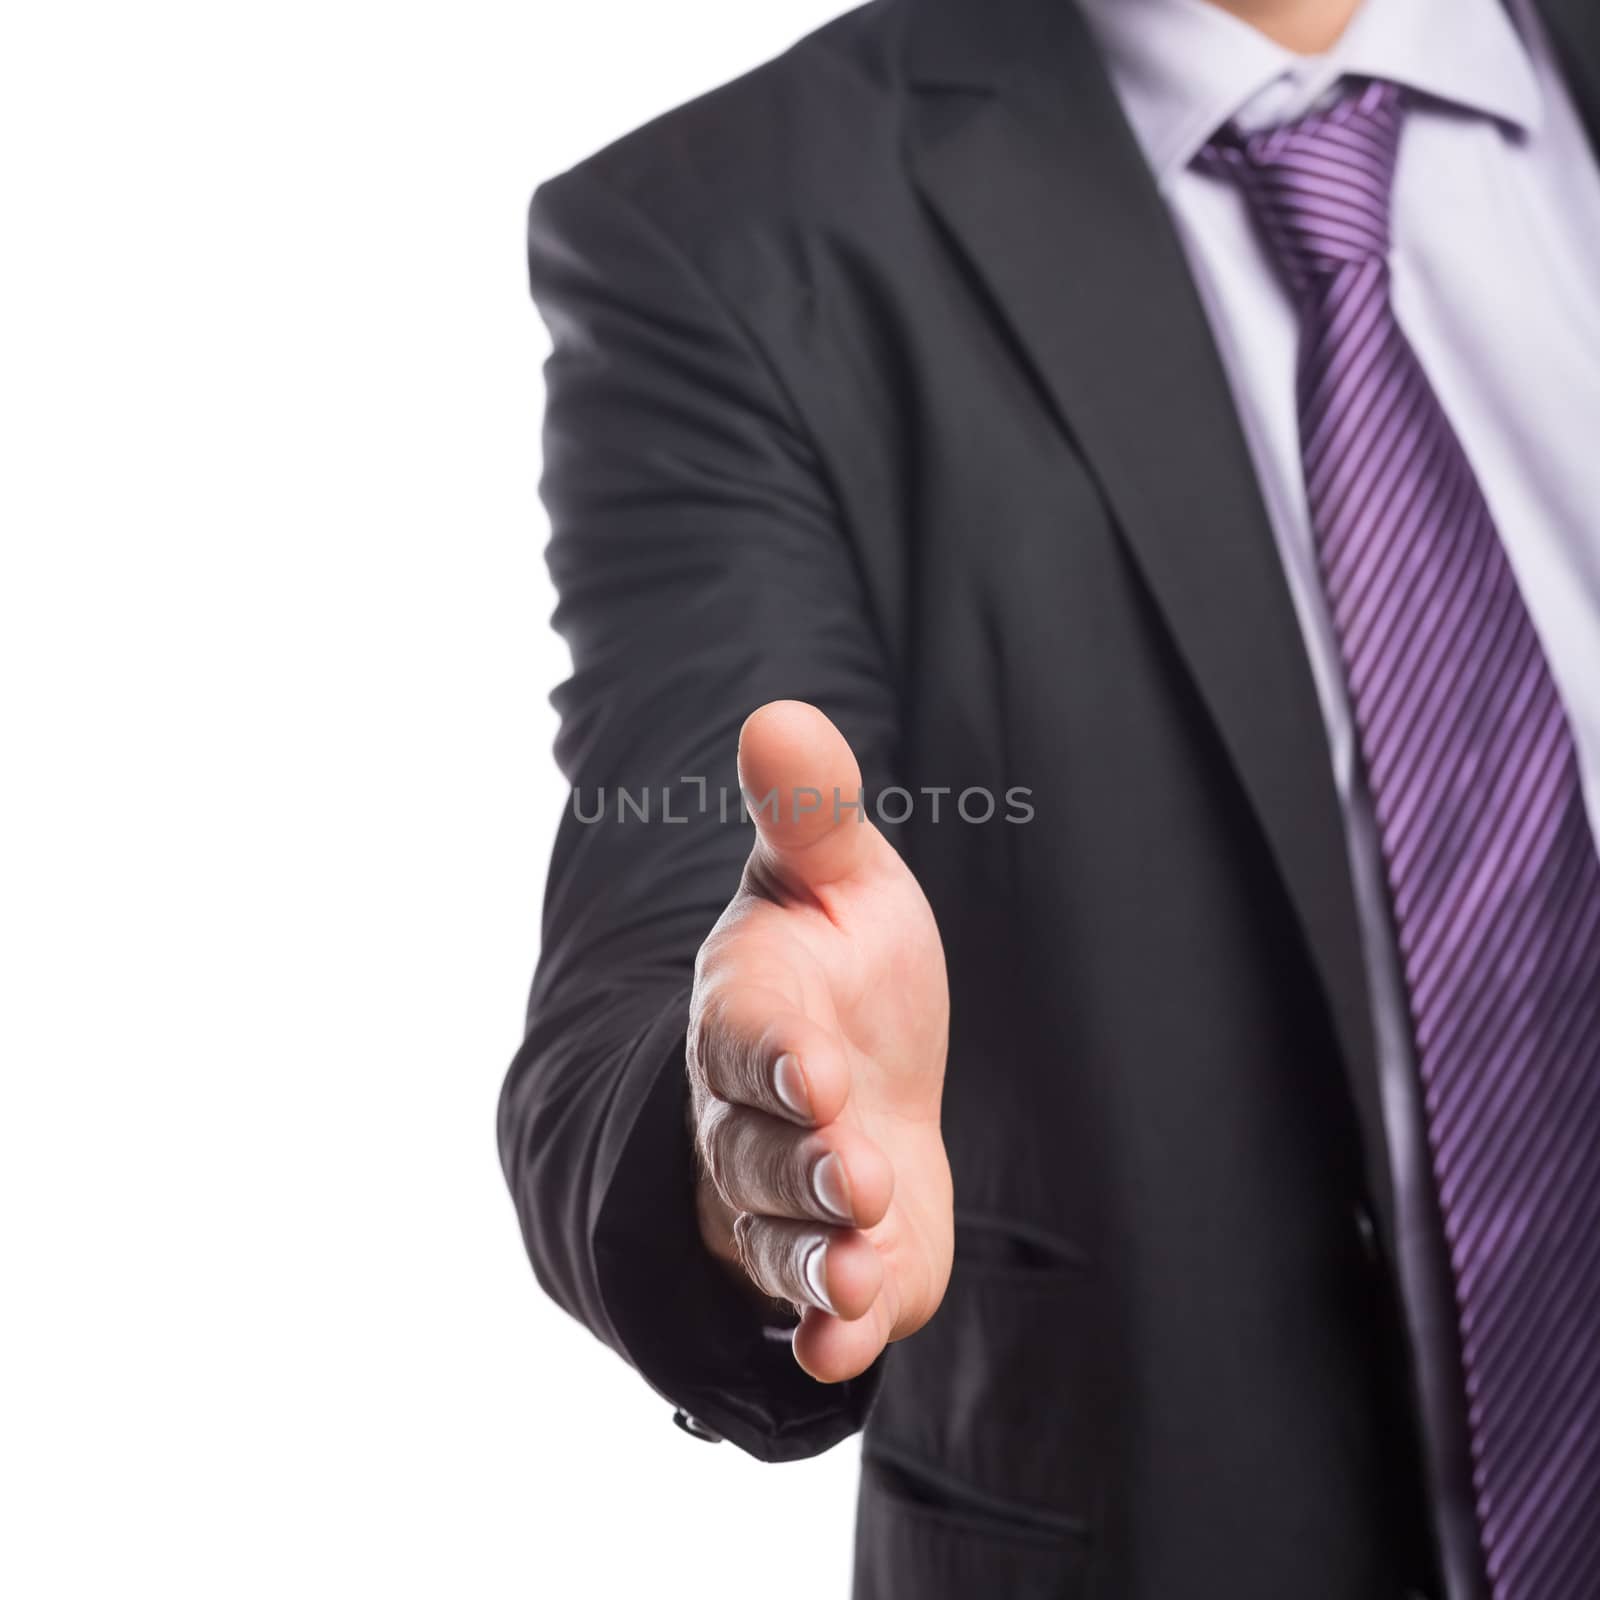 Mid section of an elegant businessman offering a handshake over white background